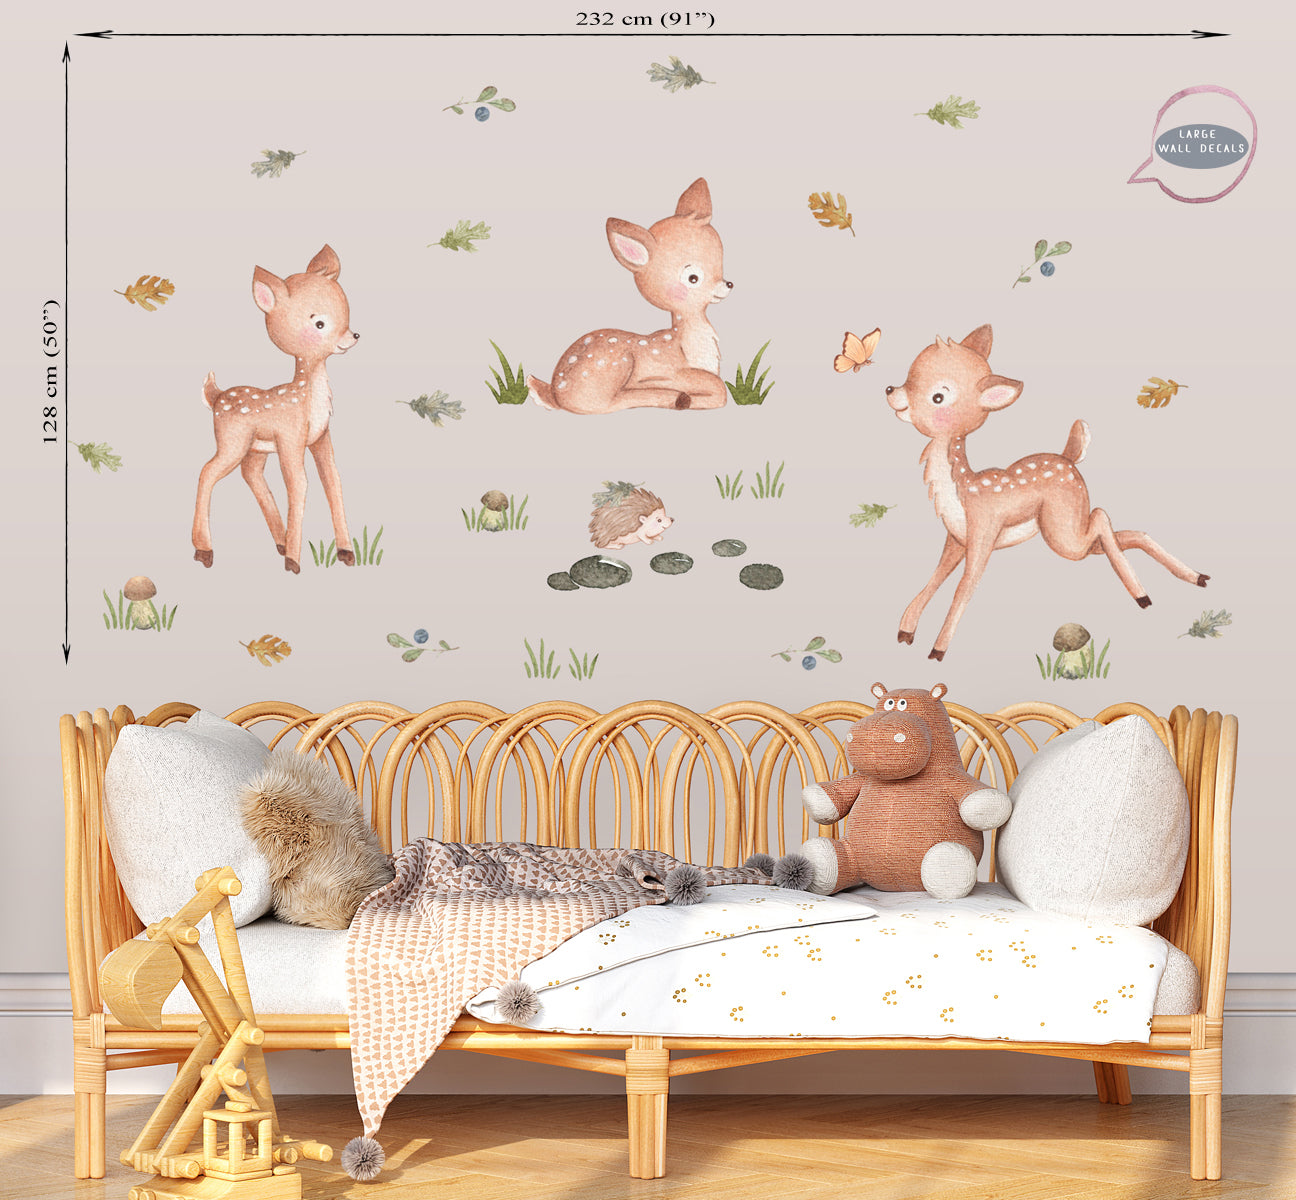 Three deer - forest animals. Big wall decals for boy's room.